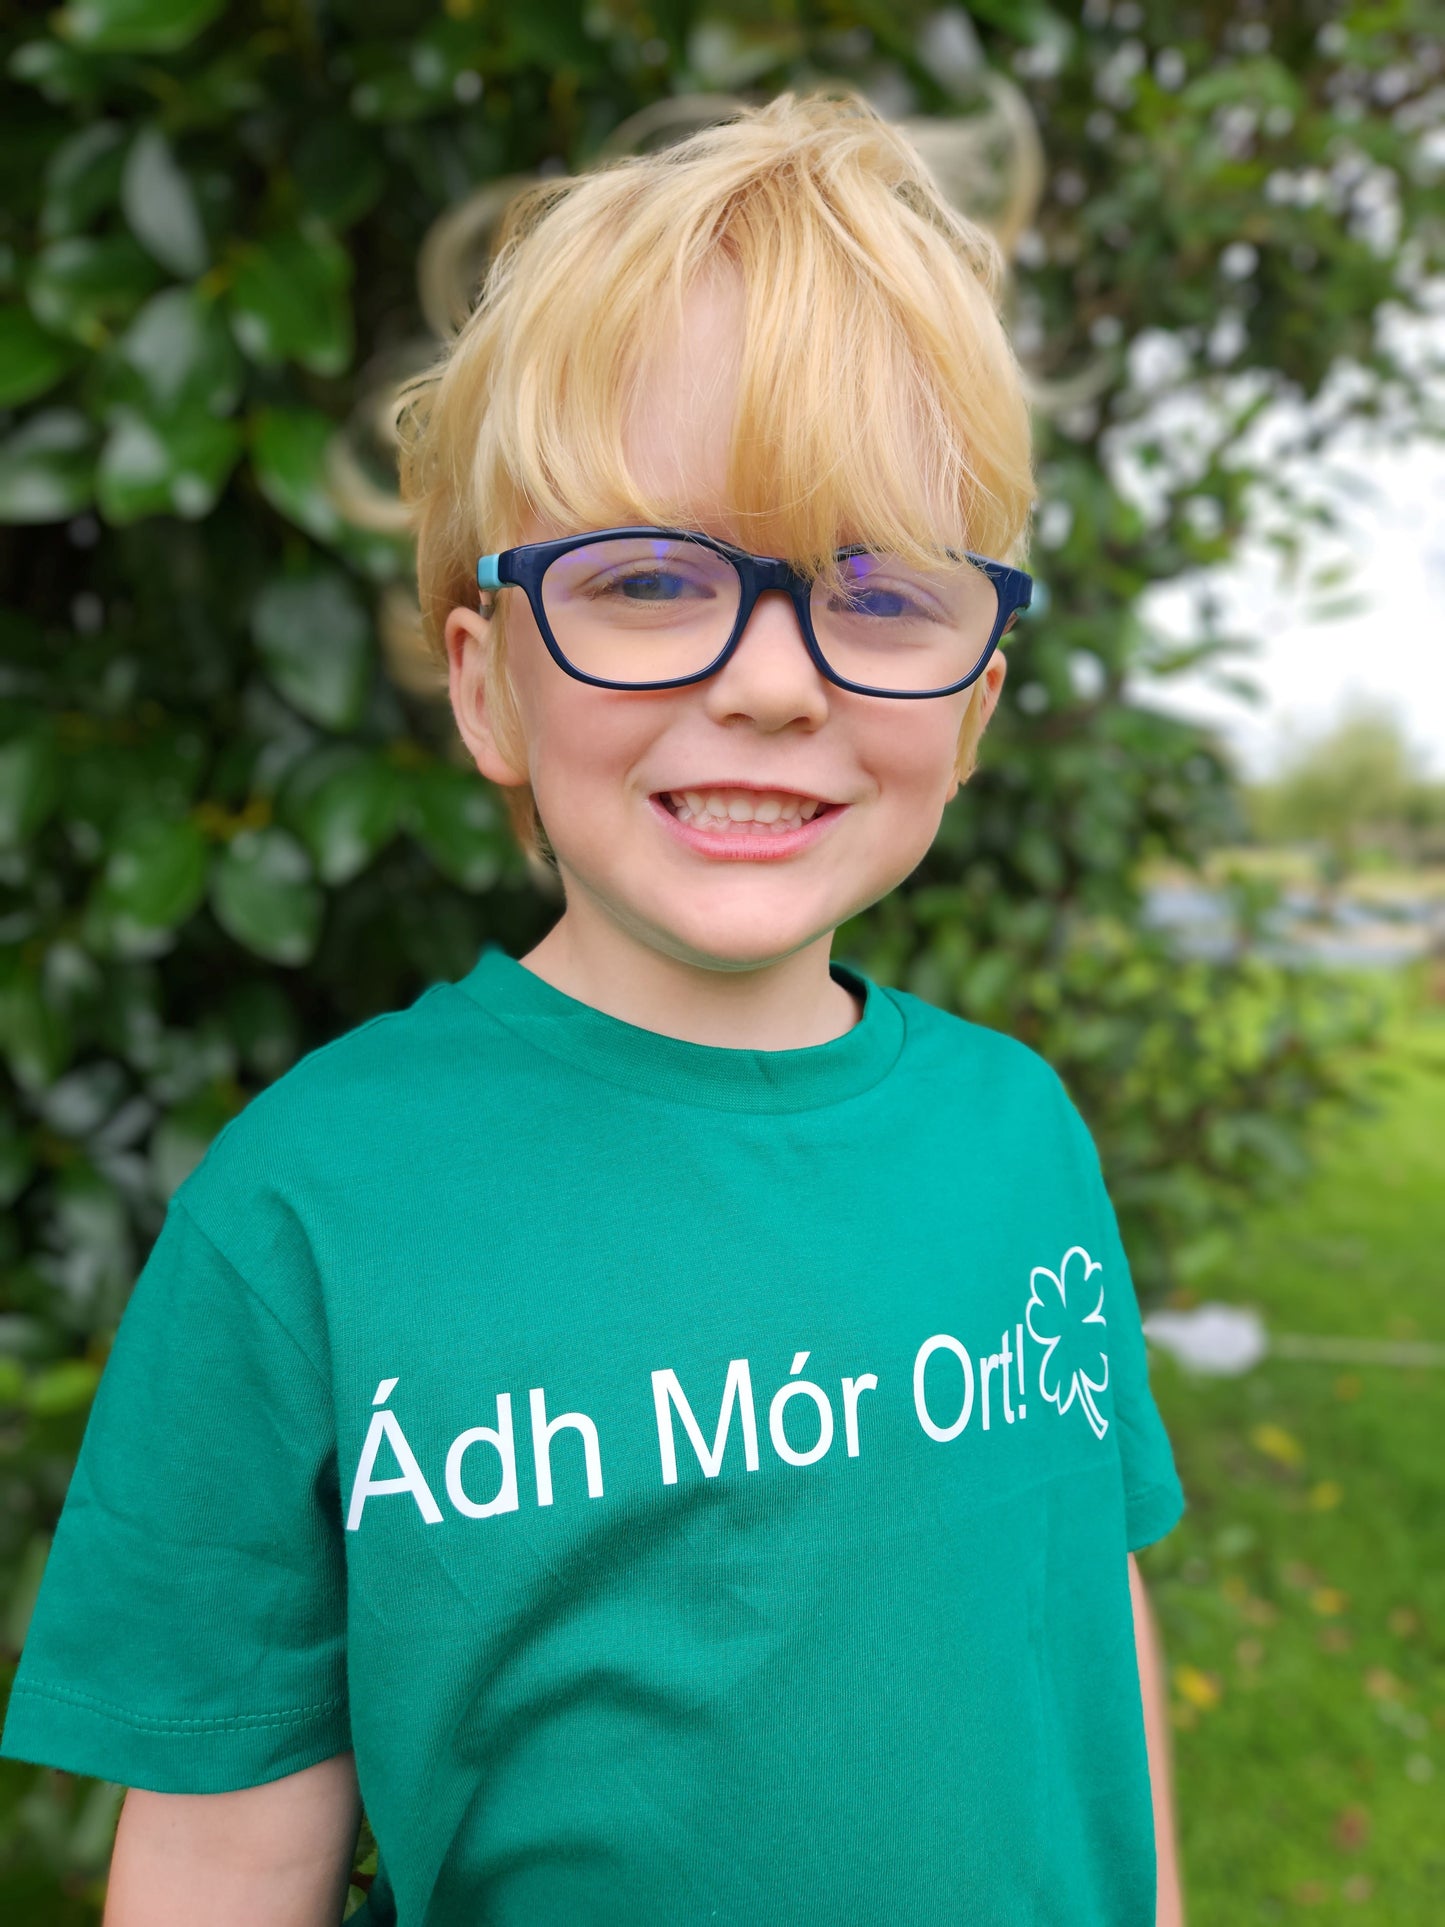 St. Patrick's Day Tees for kids